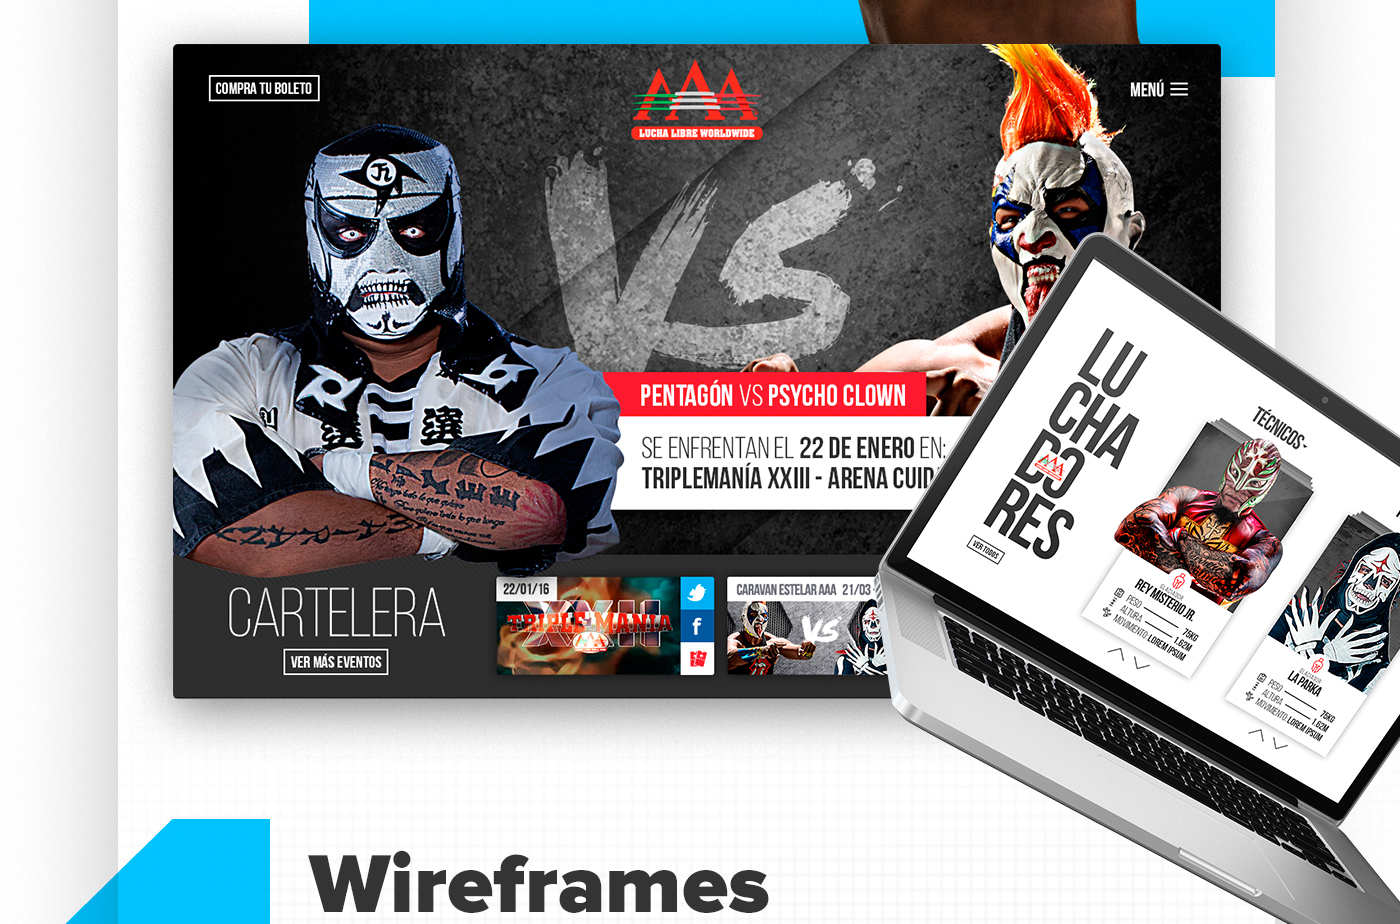 lucha libre Wrestling mexico Web fight mascara AAA Website